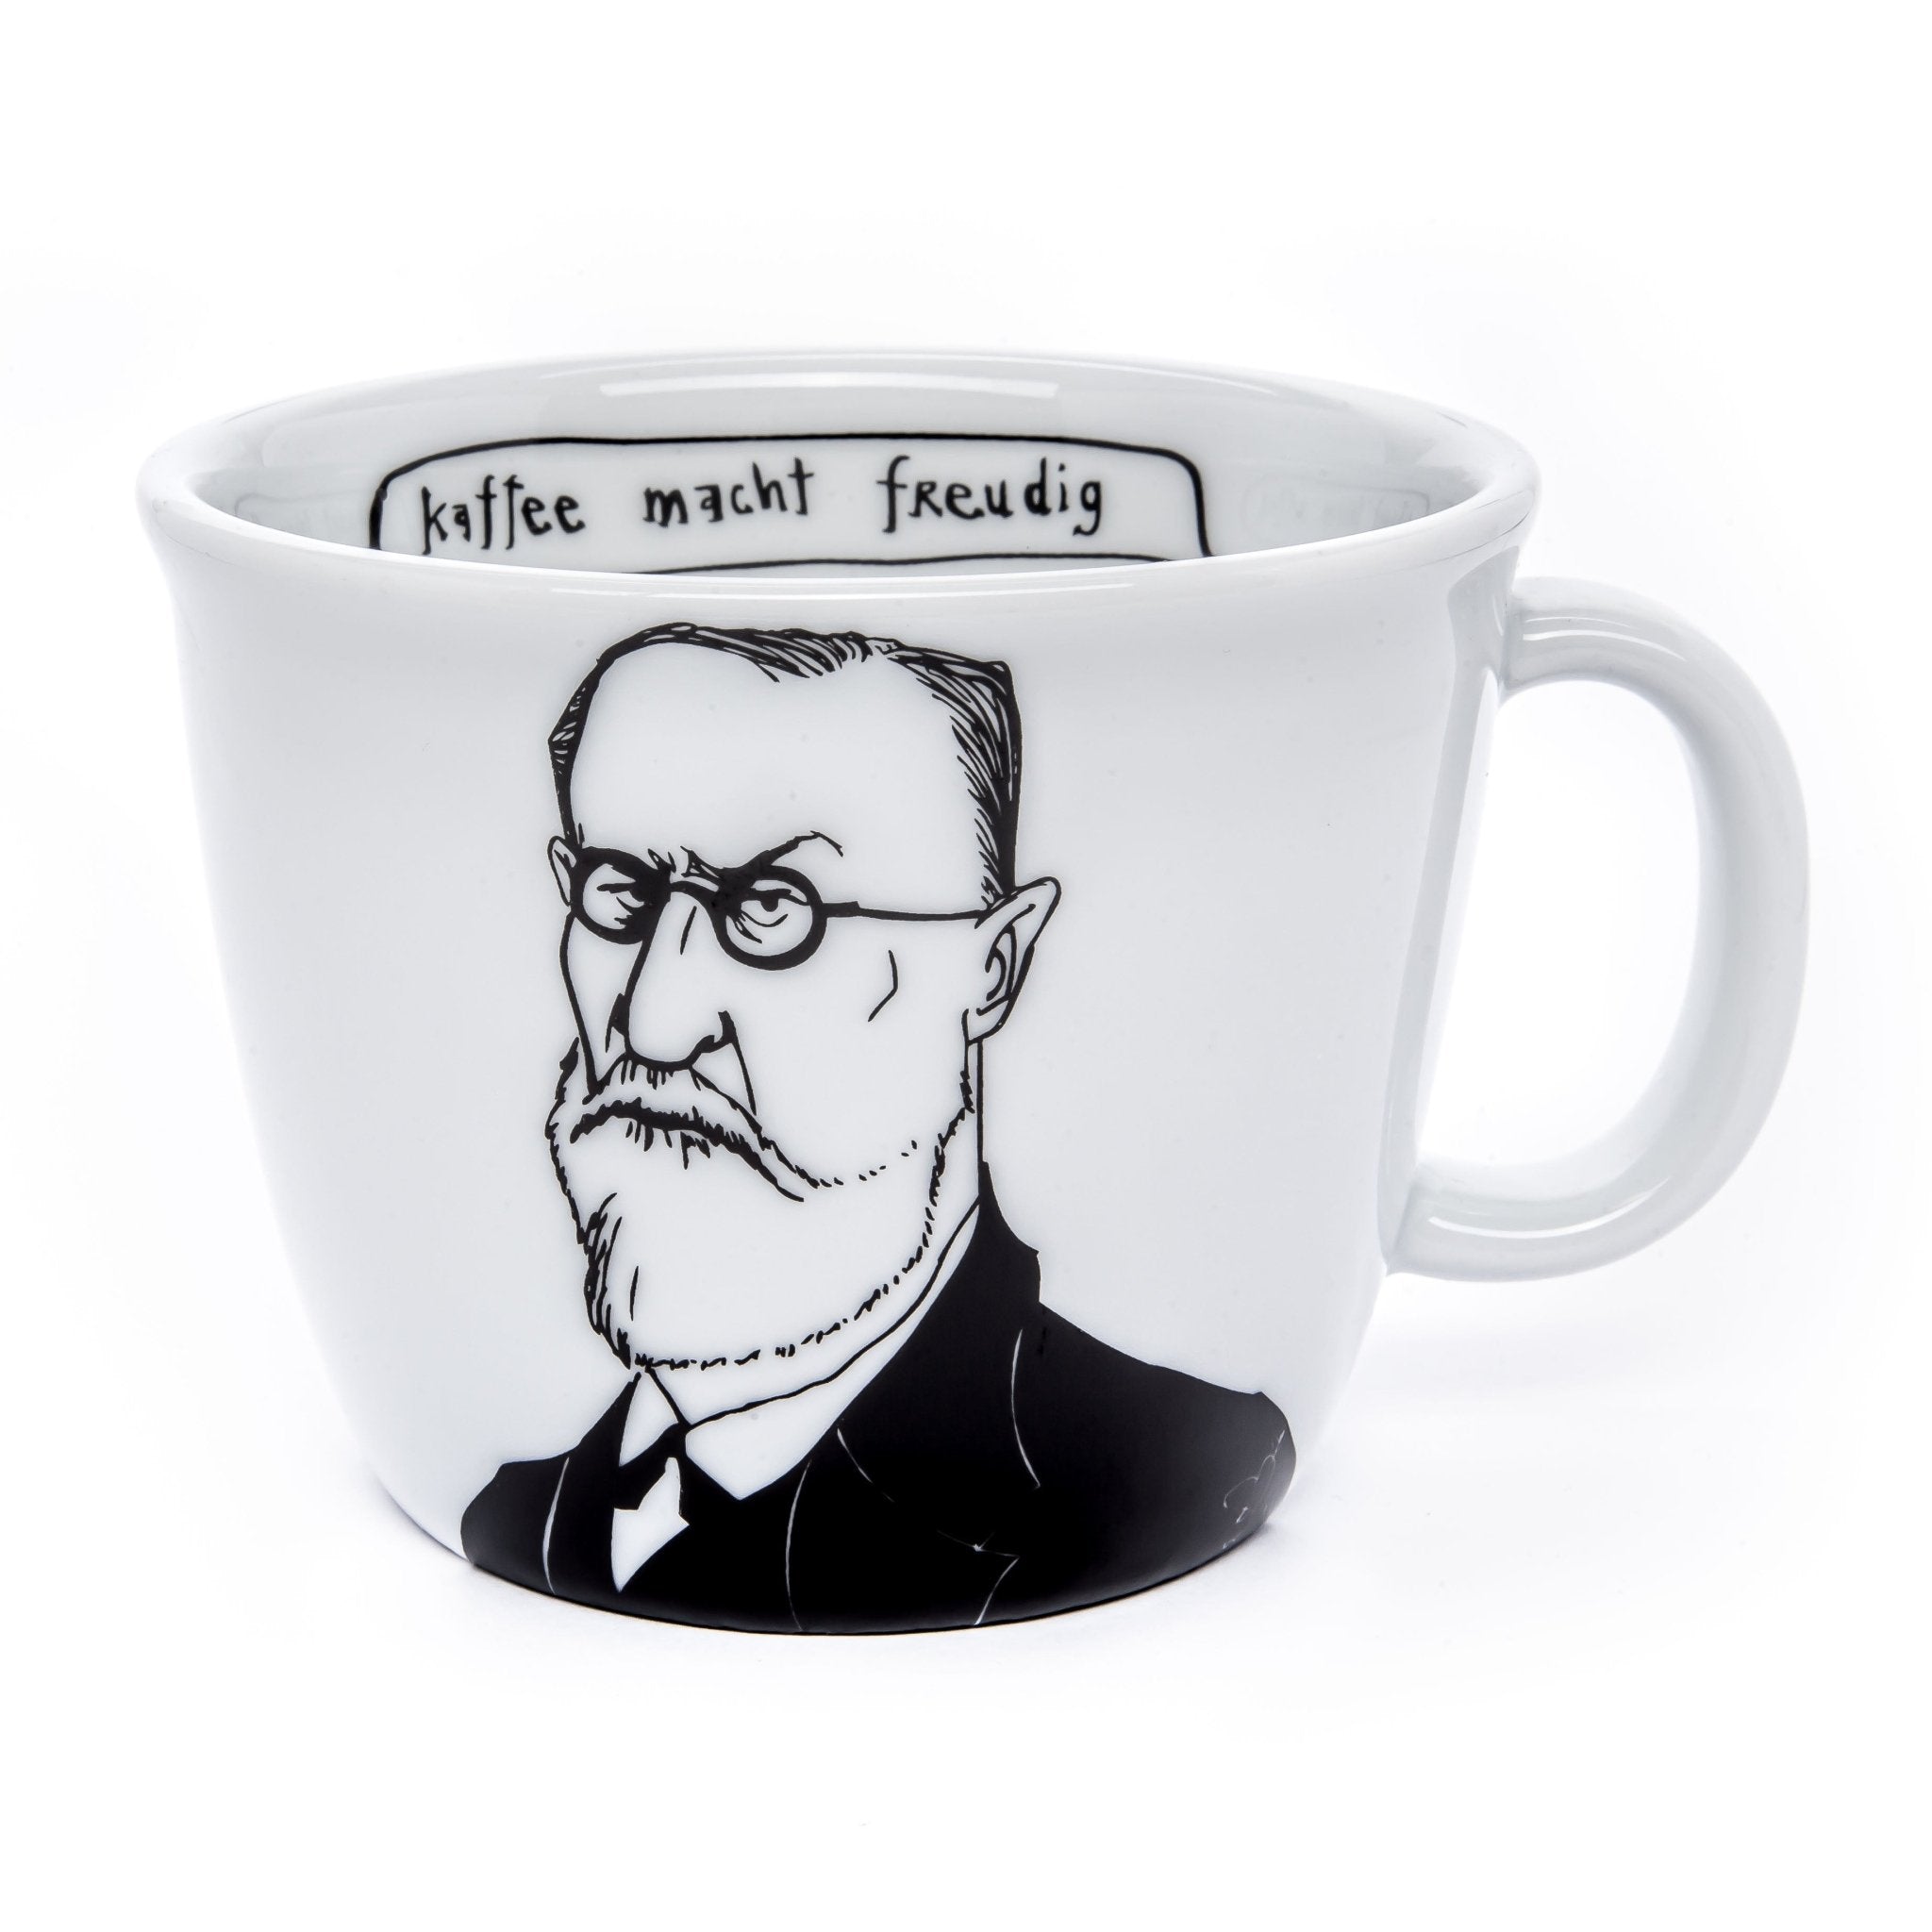 Porcelain cup inspired by Sigmund Freud